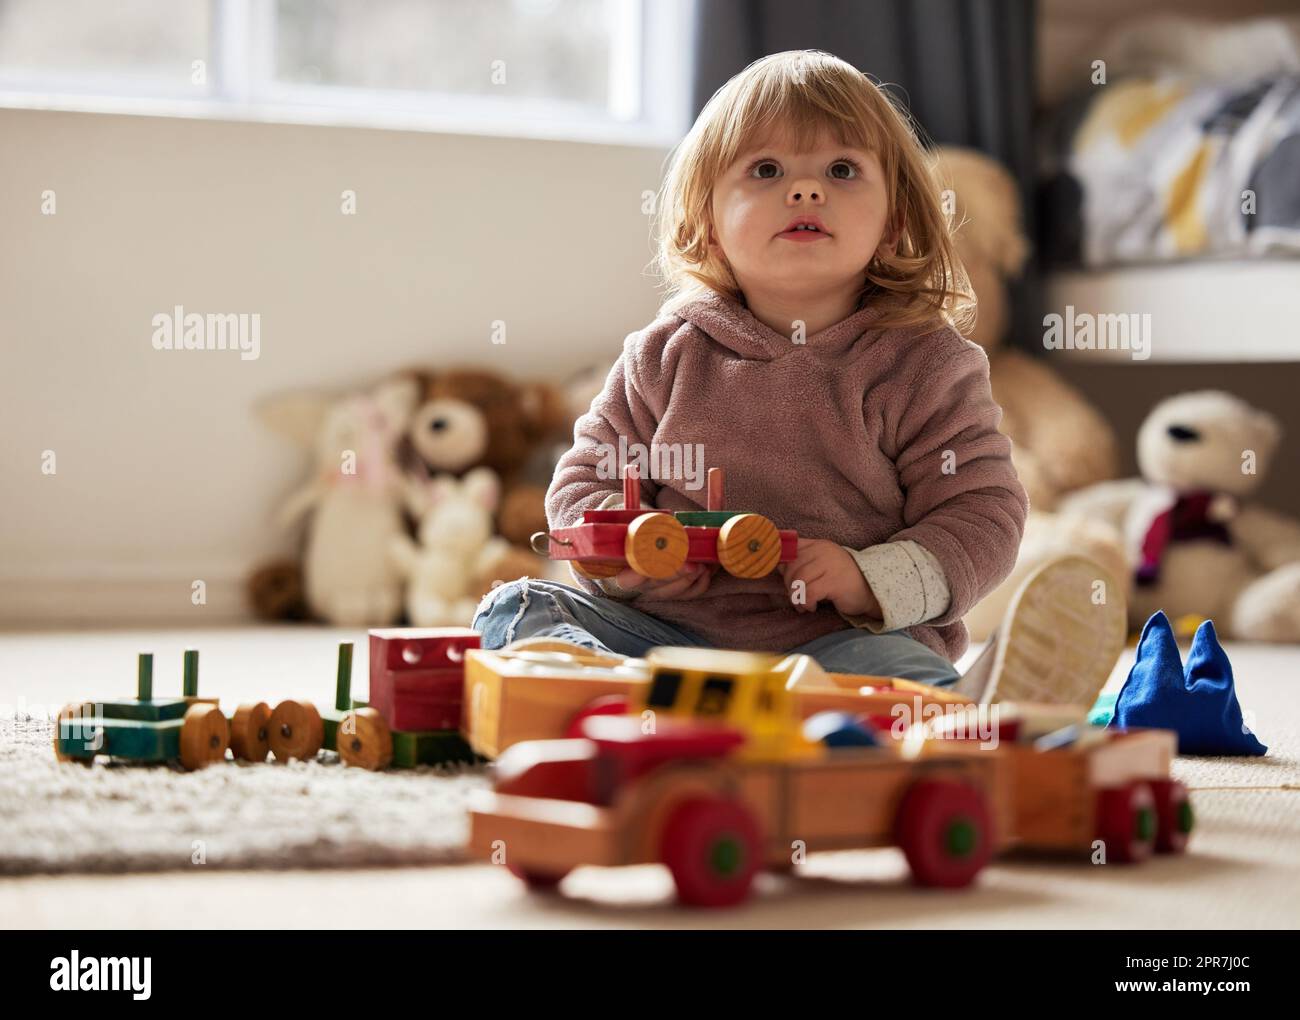 Shes having so much fun. a little girl playing at home. Stock Photo